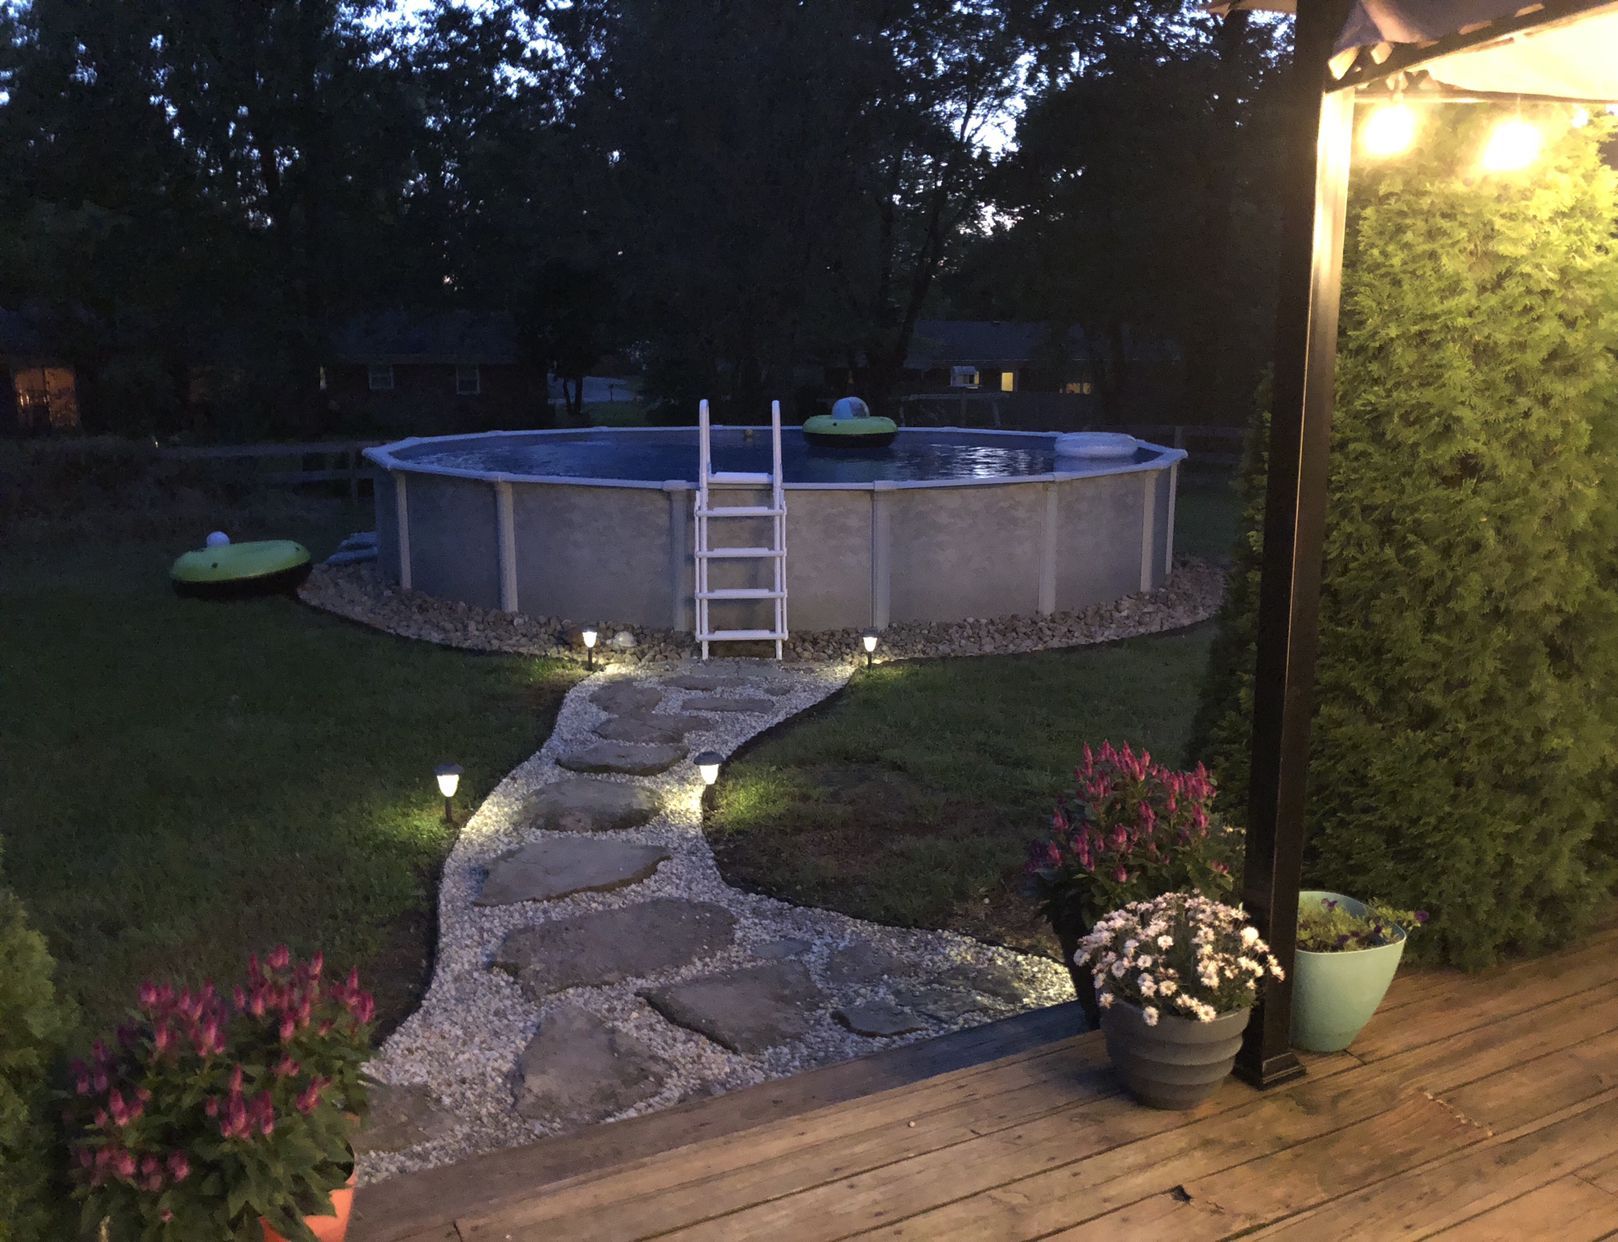 Creating a Stunning Landscape for Your Above Ground Pool: DIY Ideas to Beautify Your Outdoor Oasis